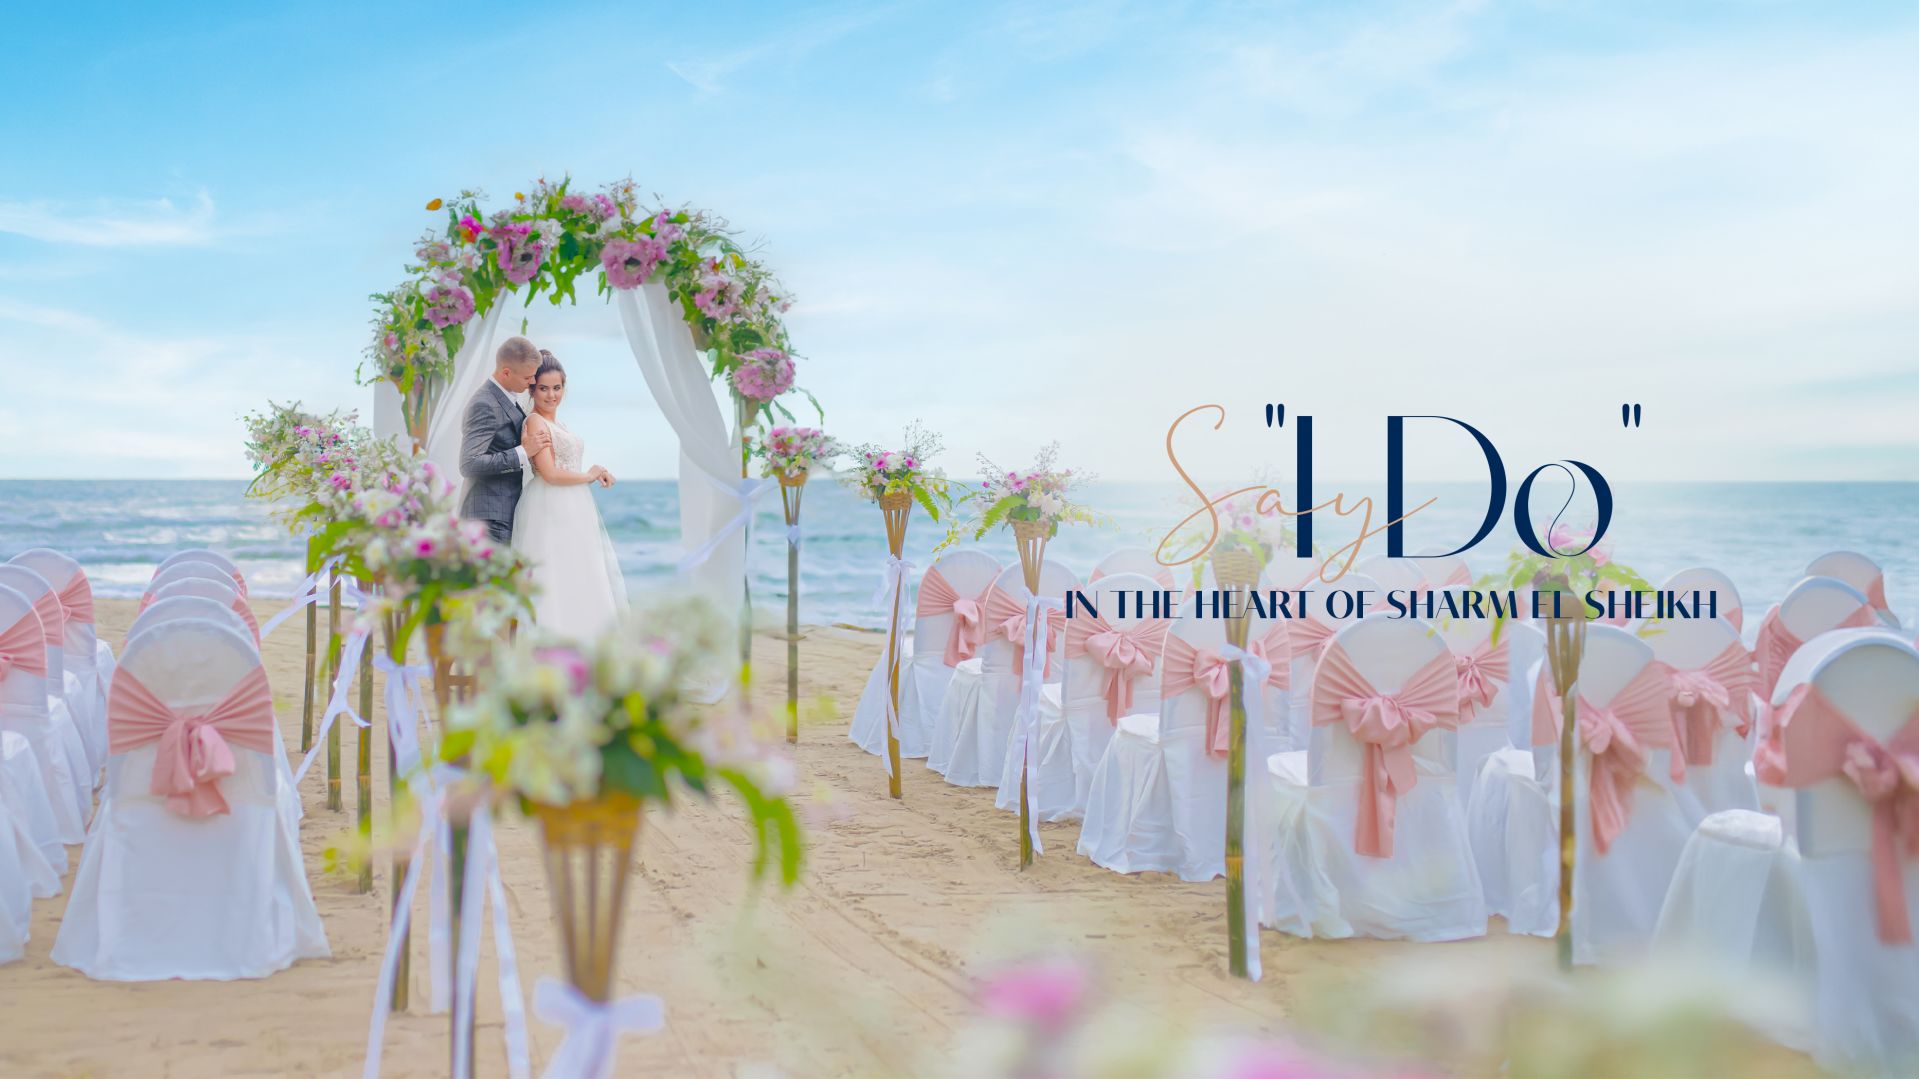 A Bride And Groom Kissing On A Beach